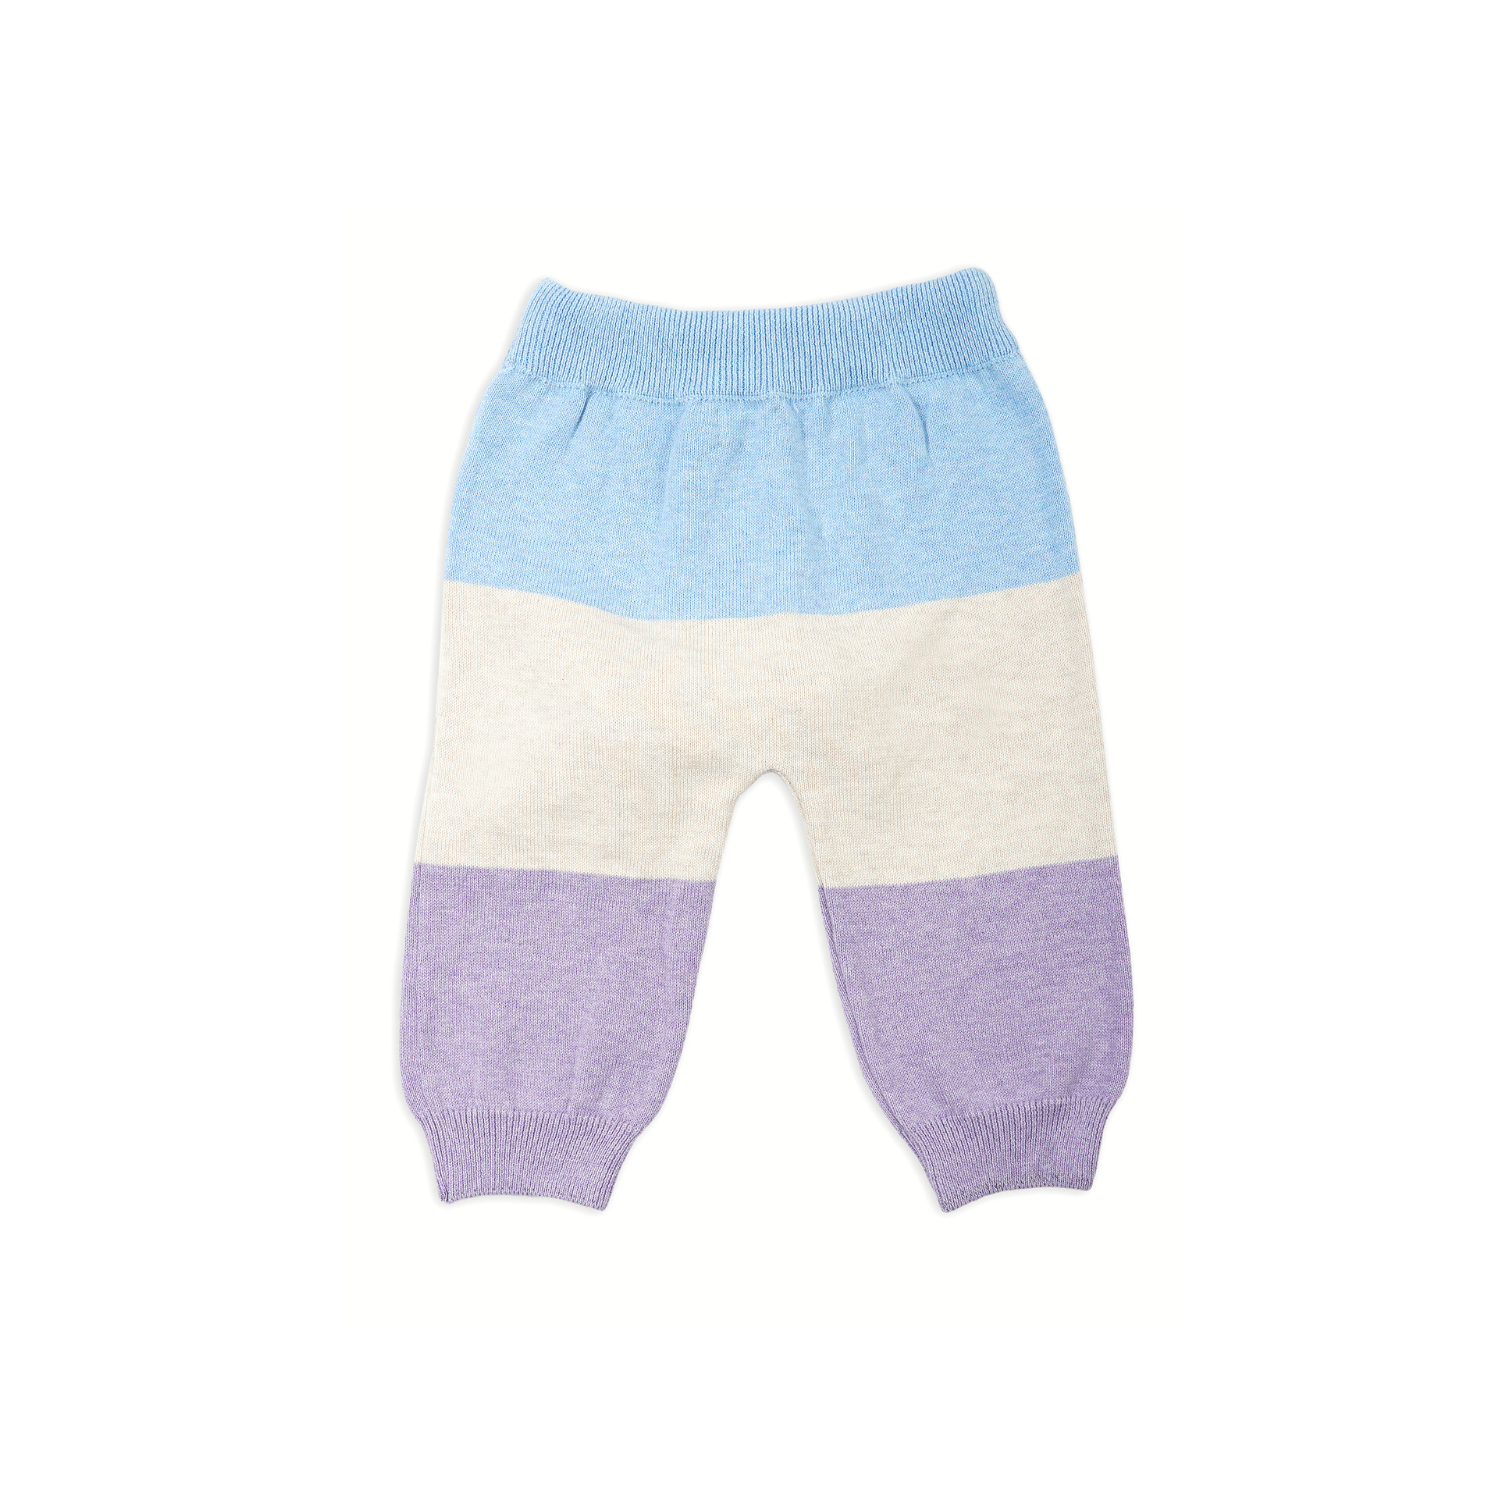 Soothing Stripe Diaper Lower